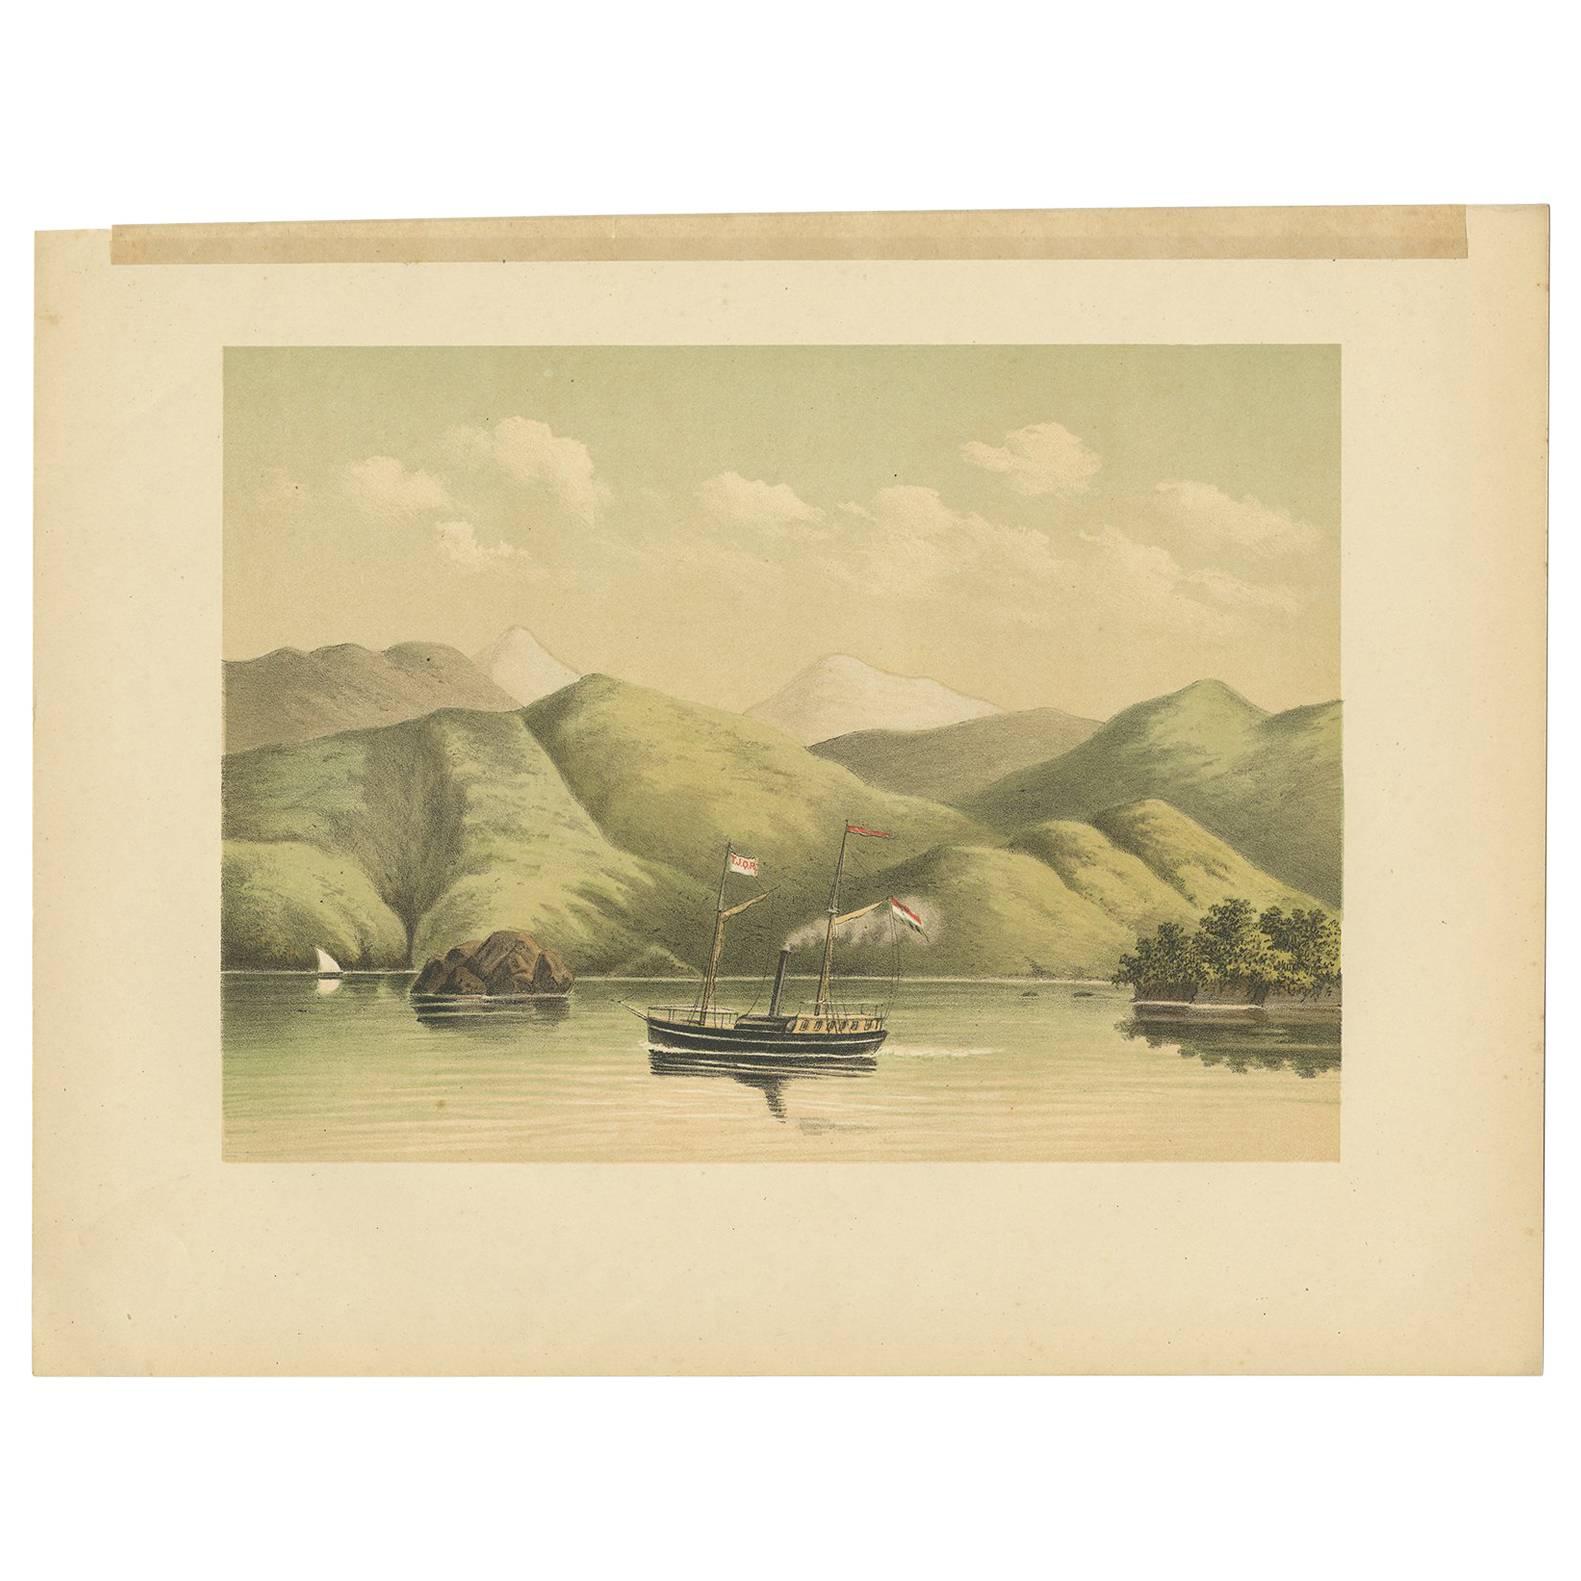 Antique Print of a Ship Near the Coast of Aceh (Atjeh) by M.T.H. Perelaer, 1888 For Sale